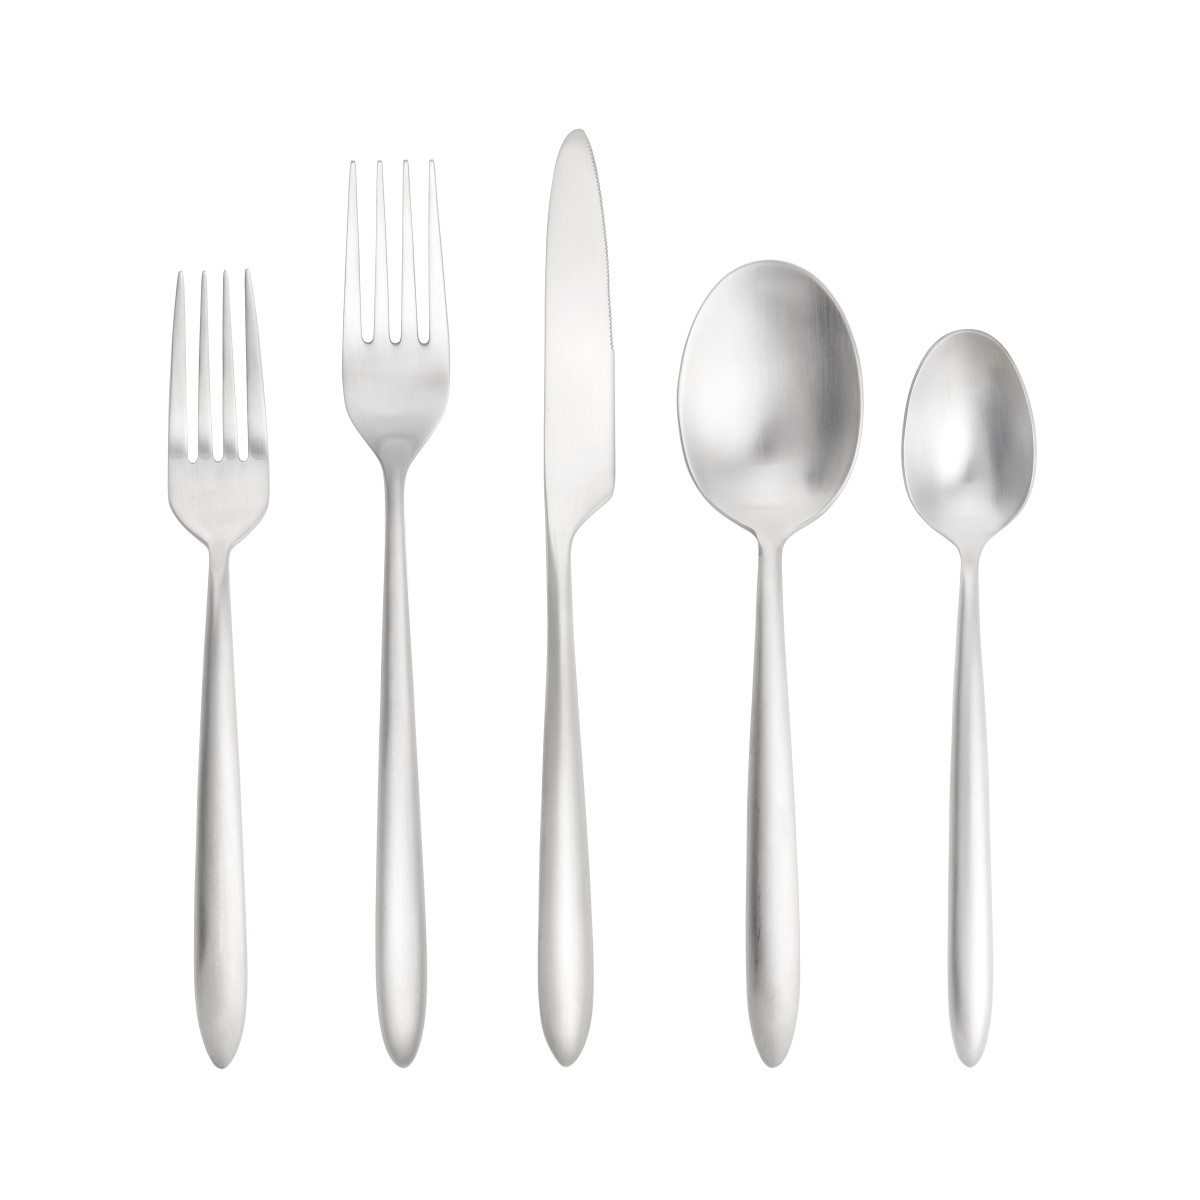 Velo Flatware, Brushed Stainless Steel, 20-Piece Set